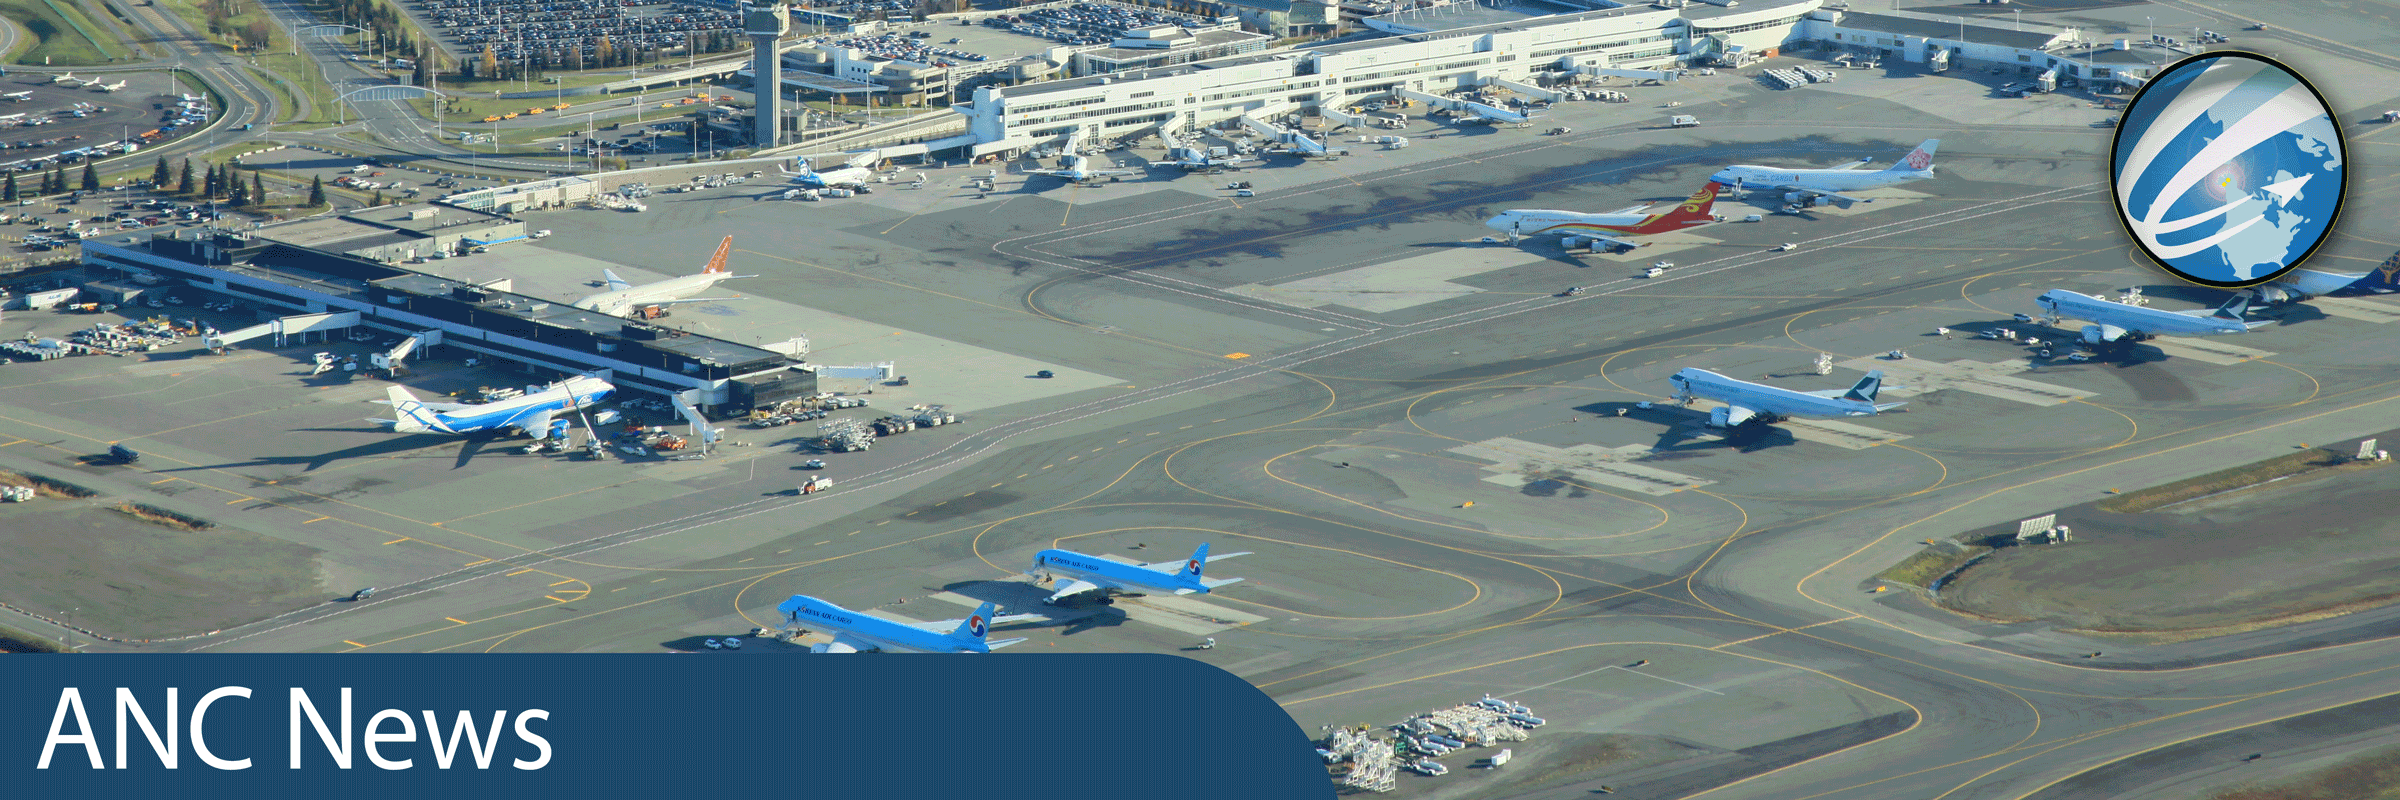 ANC North and South Terminals